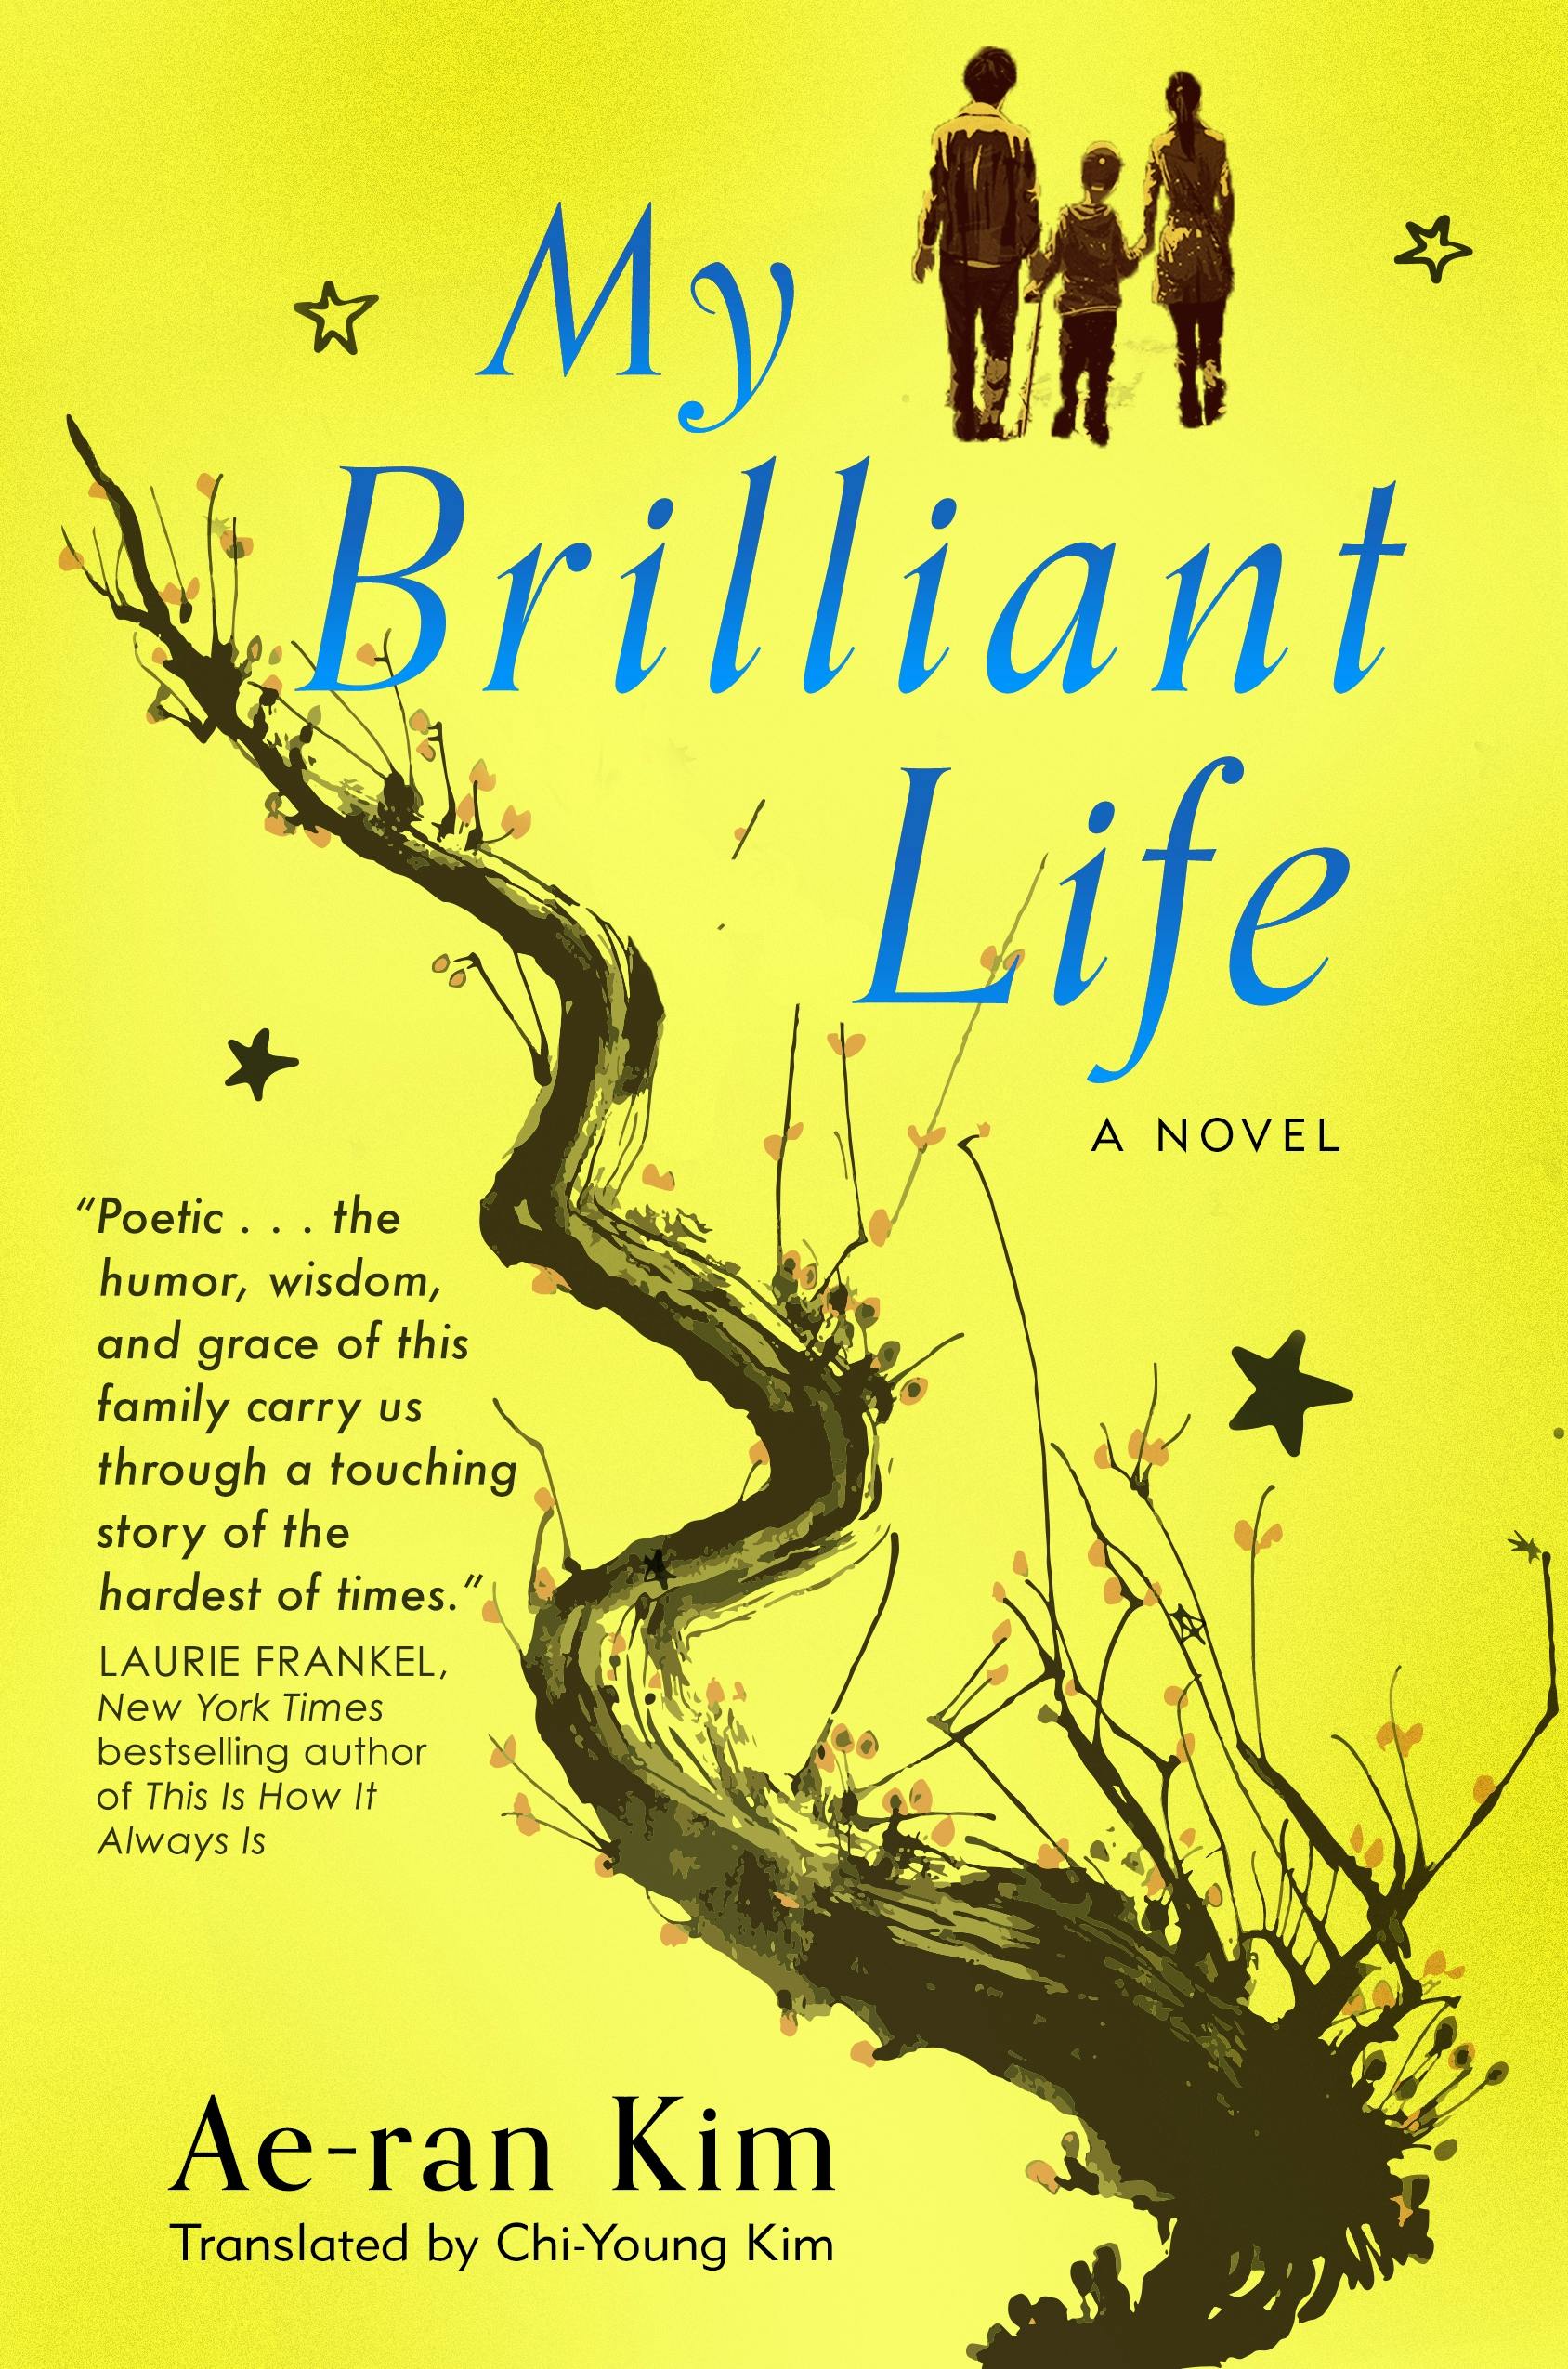 my brilliant life book review